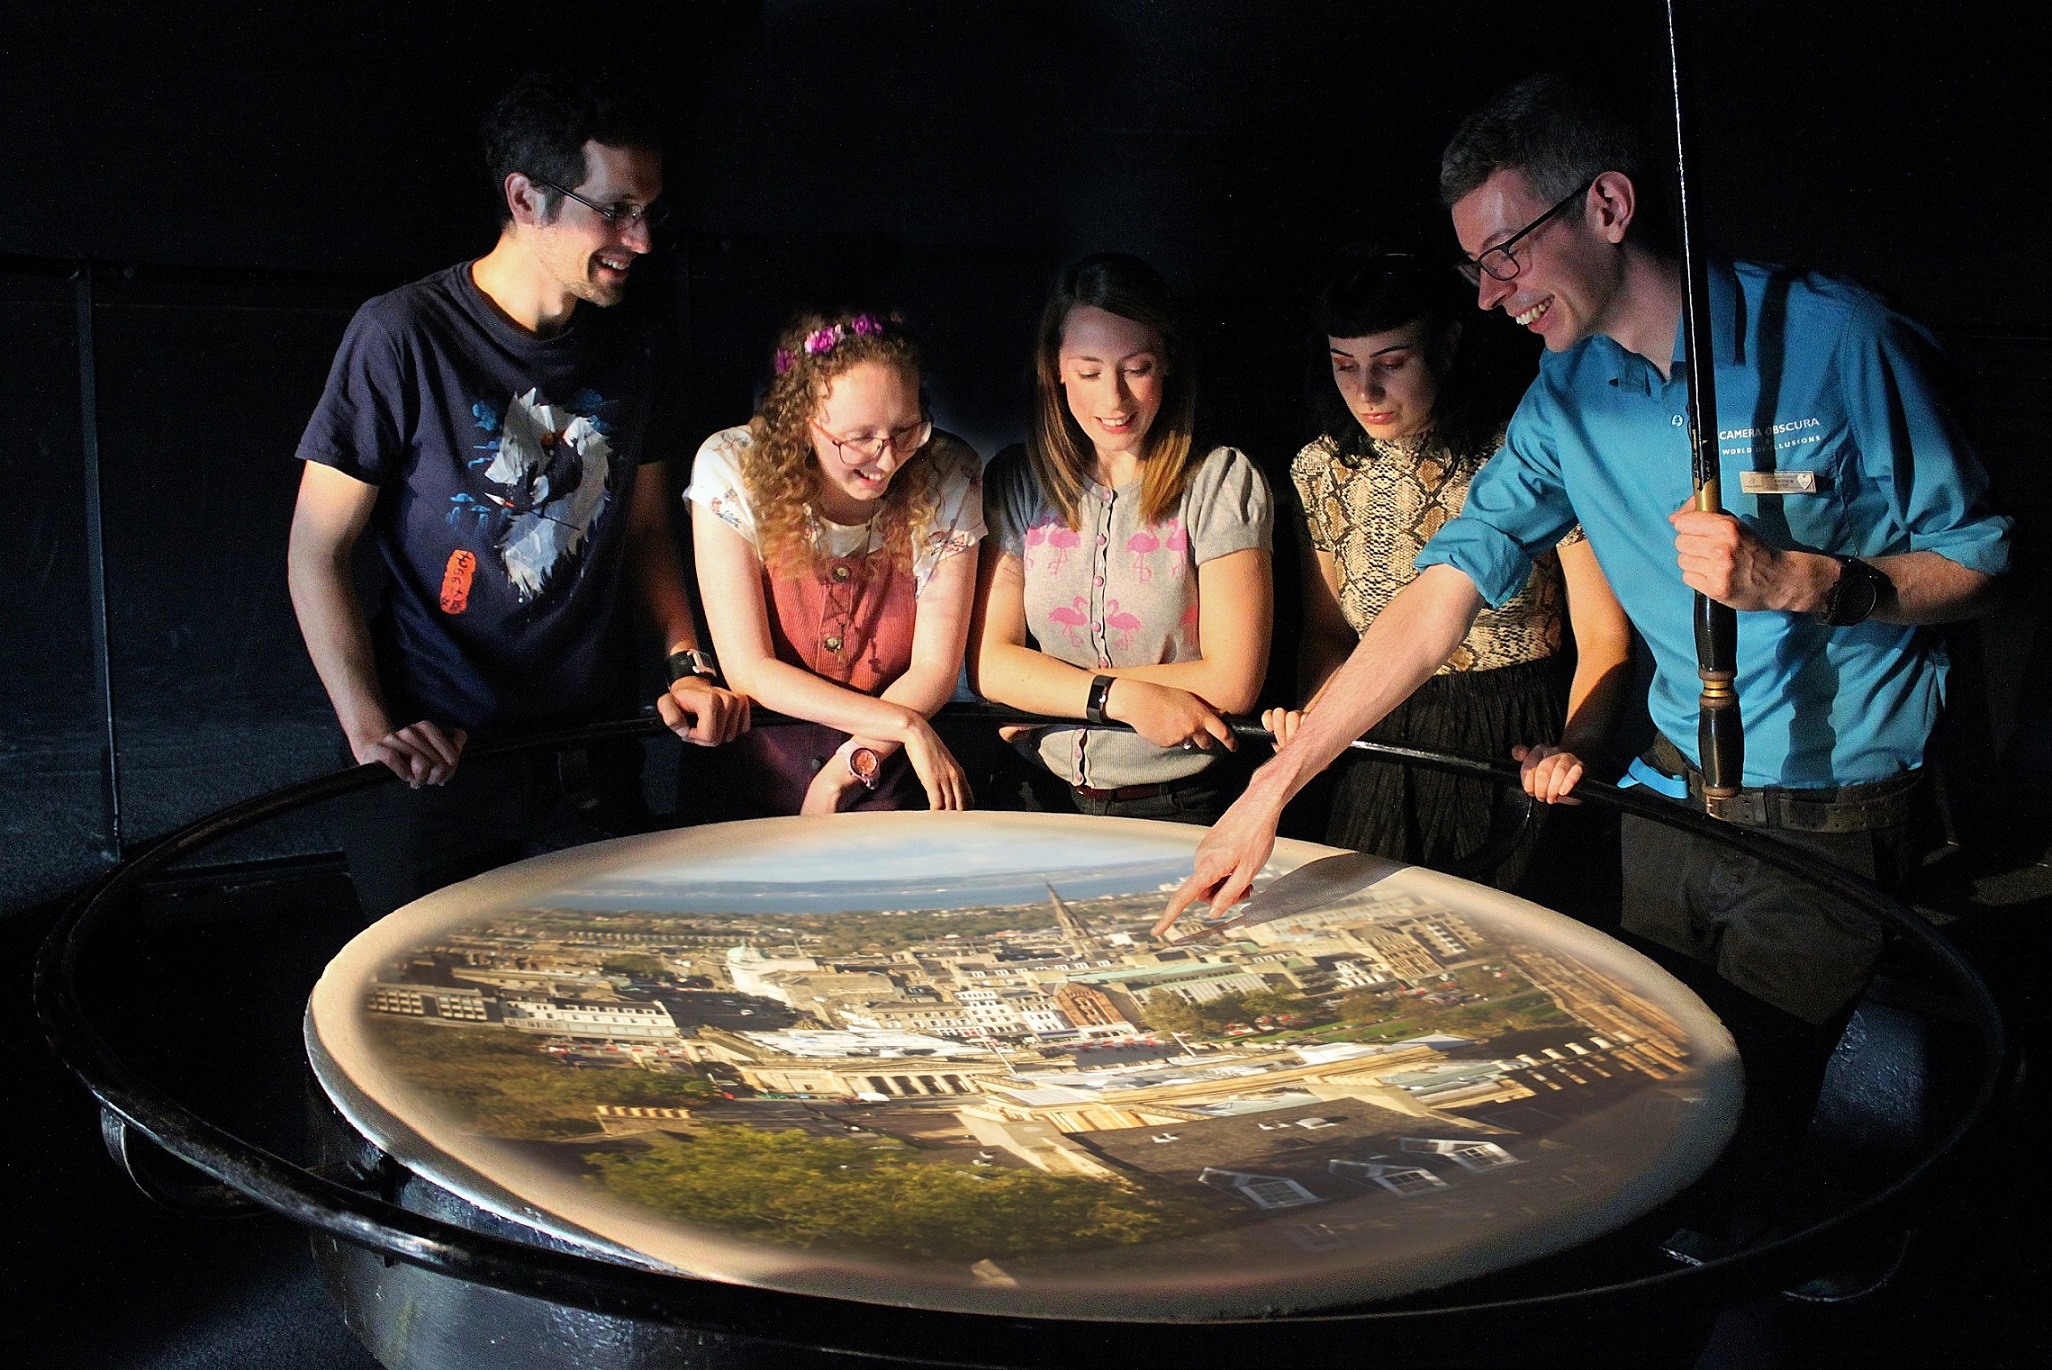 What Is A Camera Obscura Camera Obscura And World Of Illusions Edinburgh